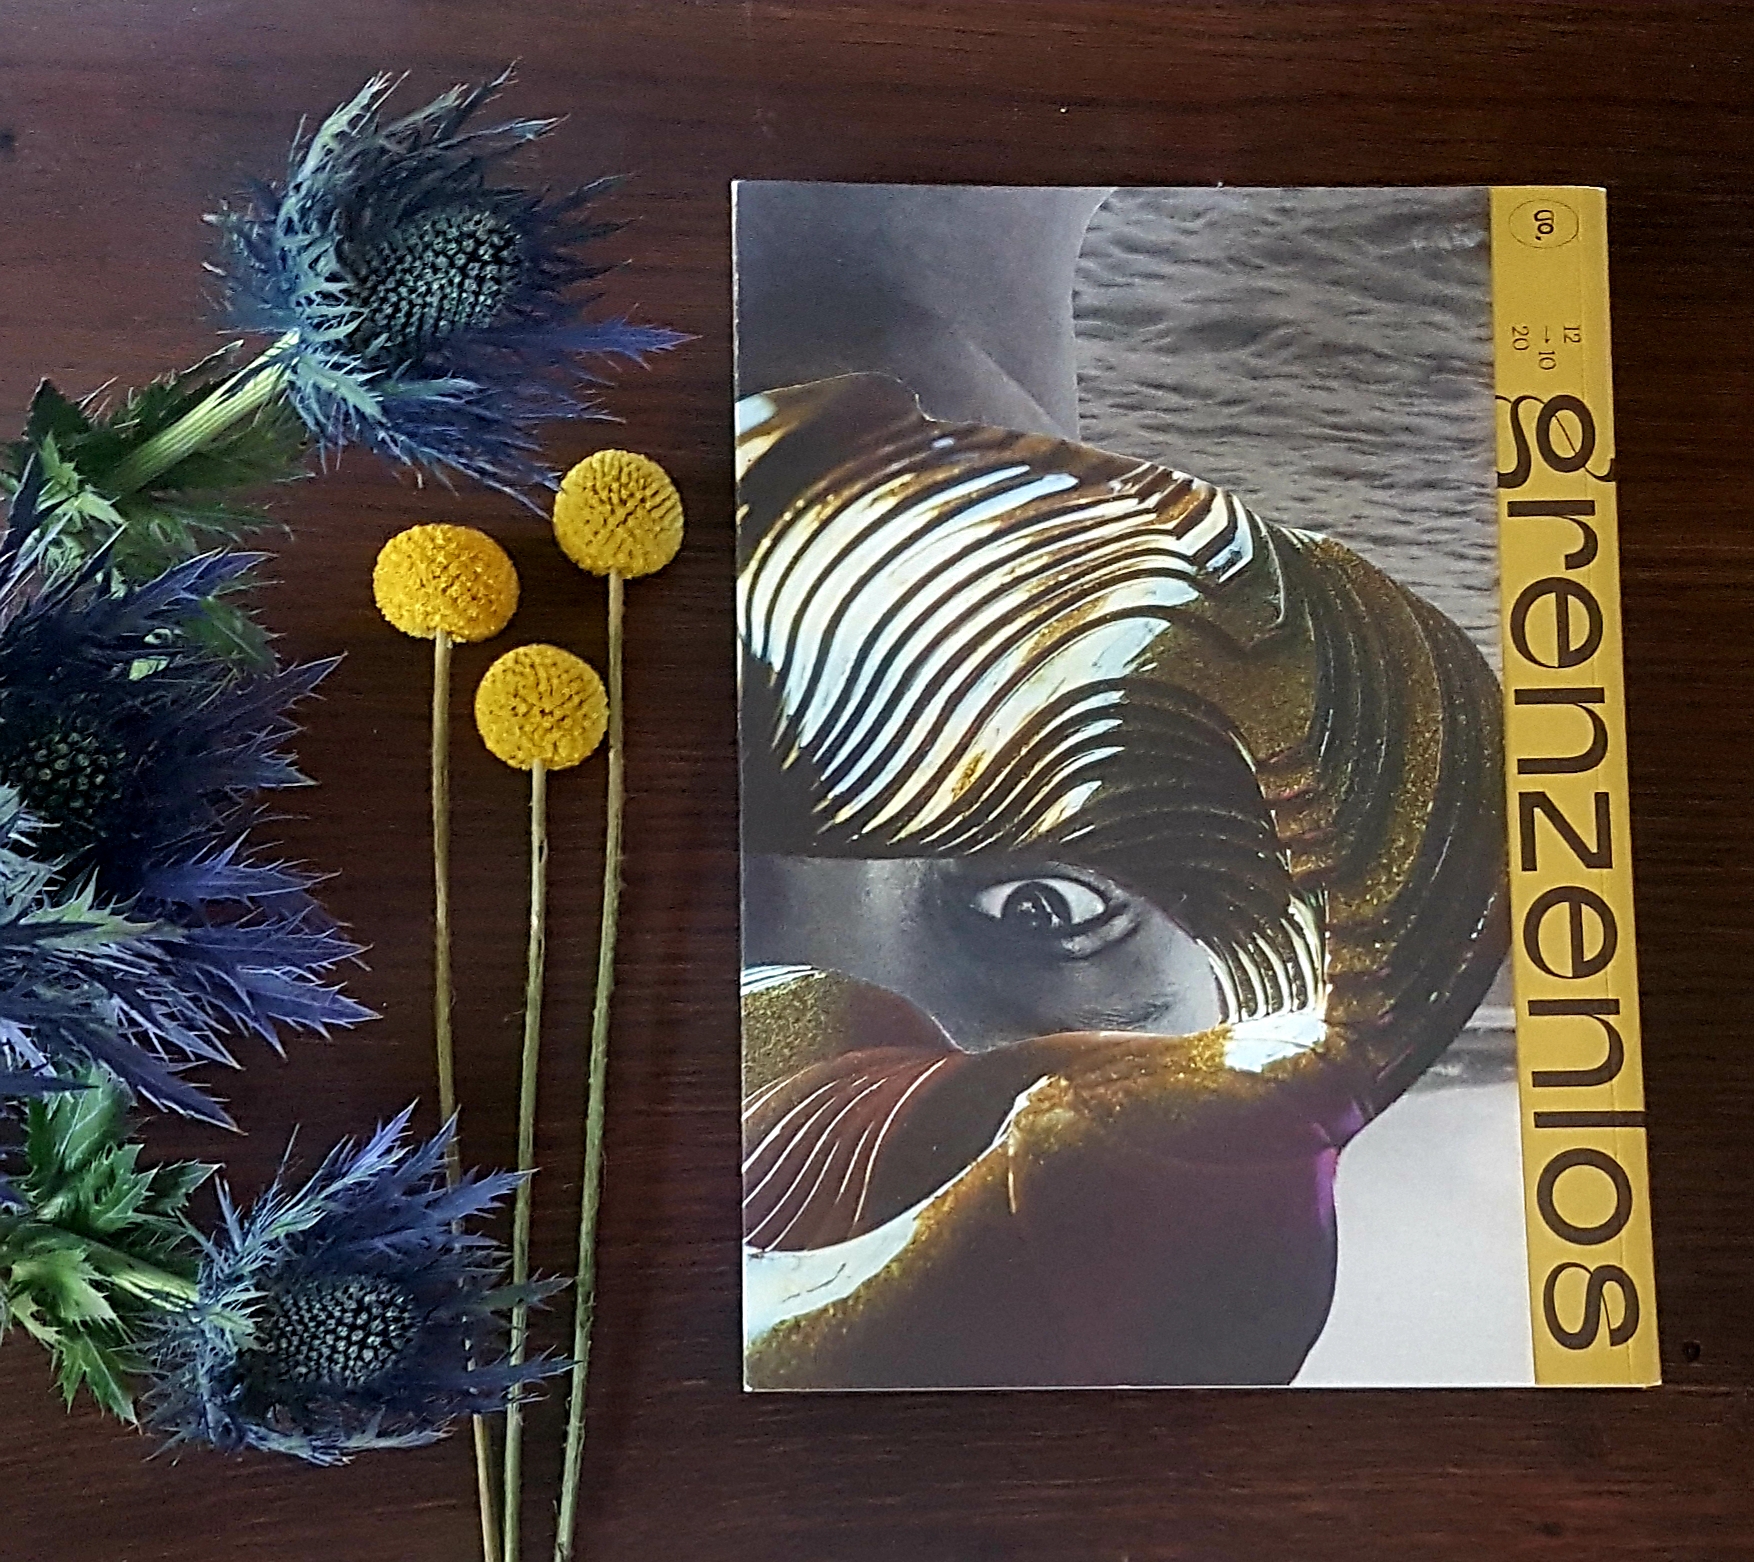 grenzenlos – a bookazine for an exhibition at the Museum of Work in Hamburg